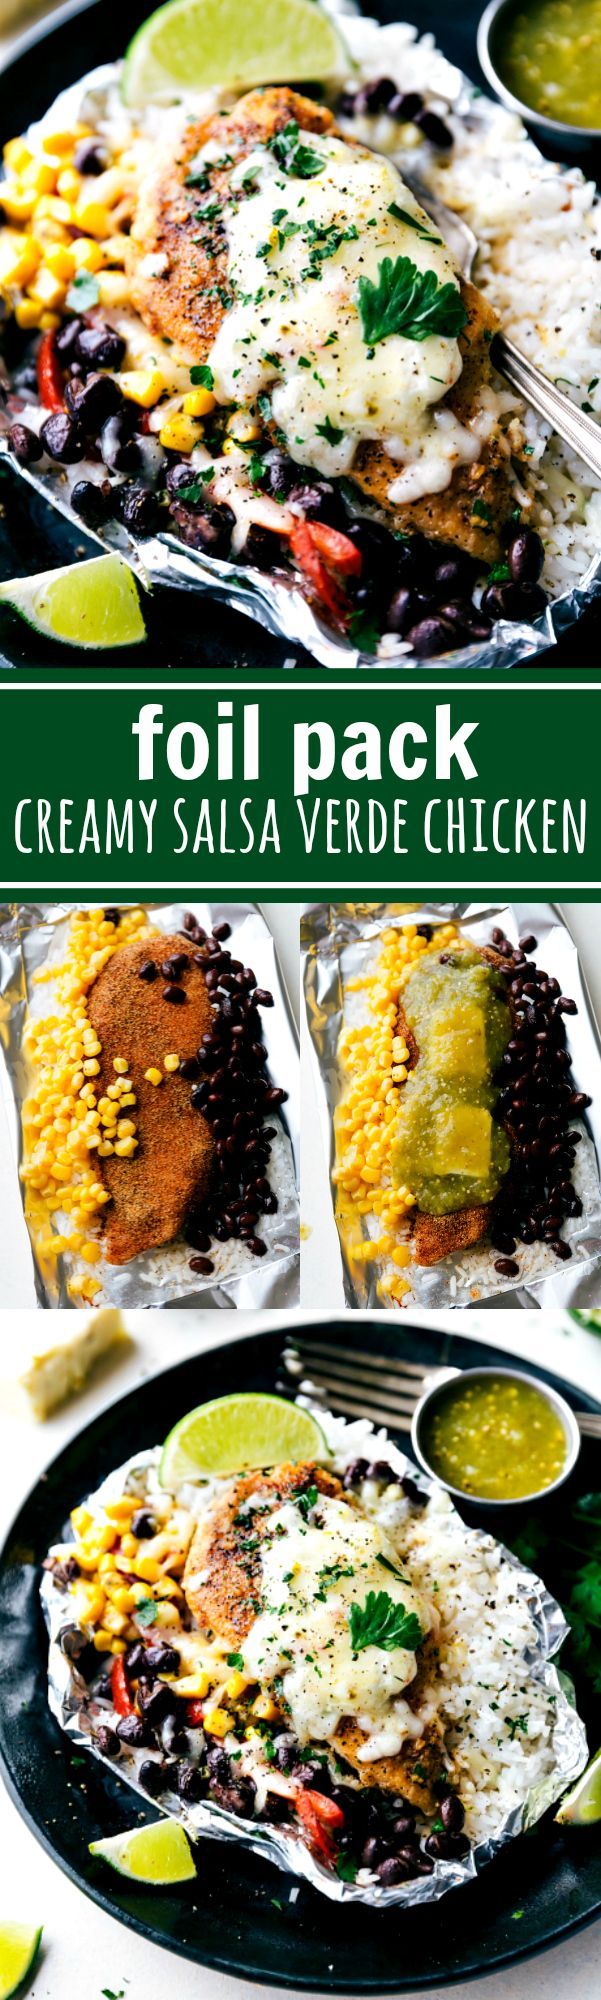 EASY FOIL PACKET Creamy salsa verde chicken with rice and veggies all cooked at once in a foil packet!